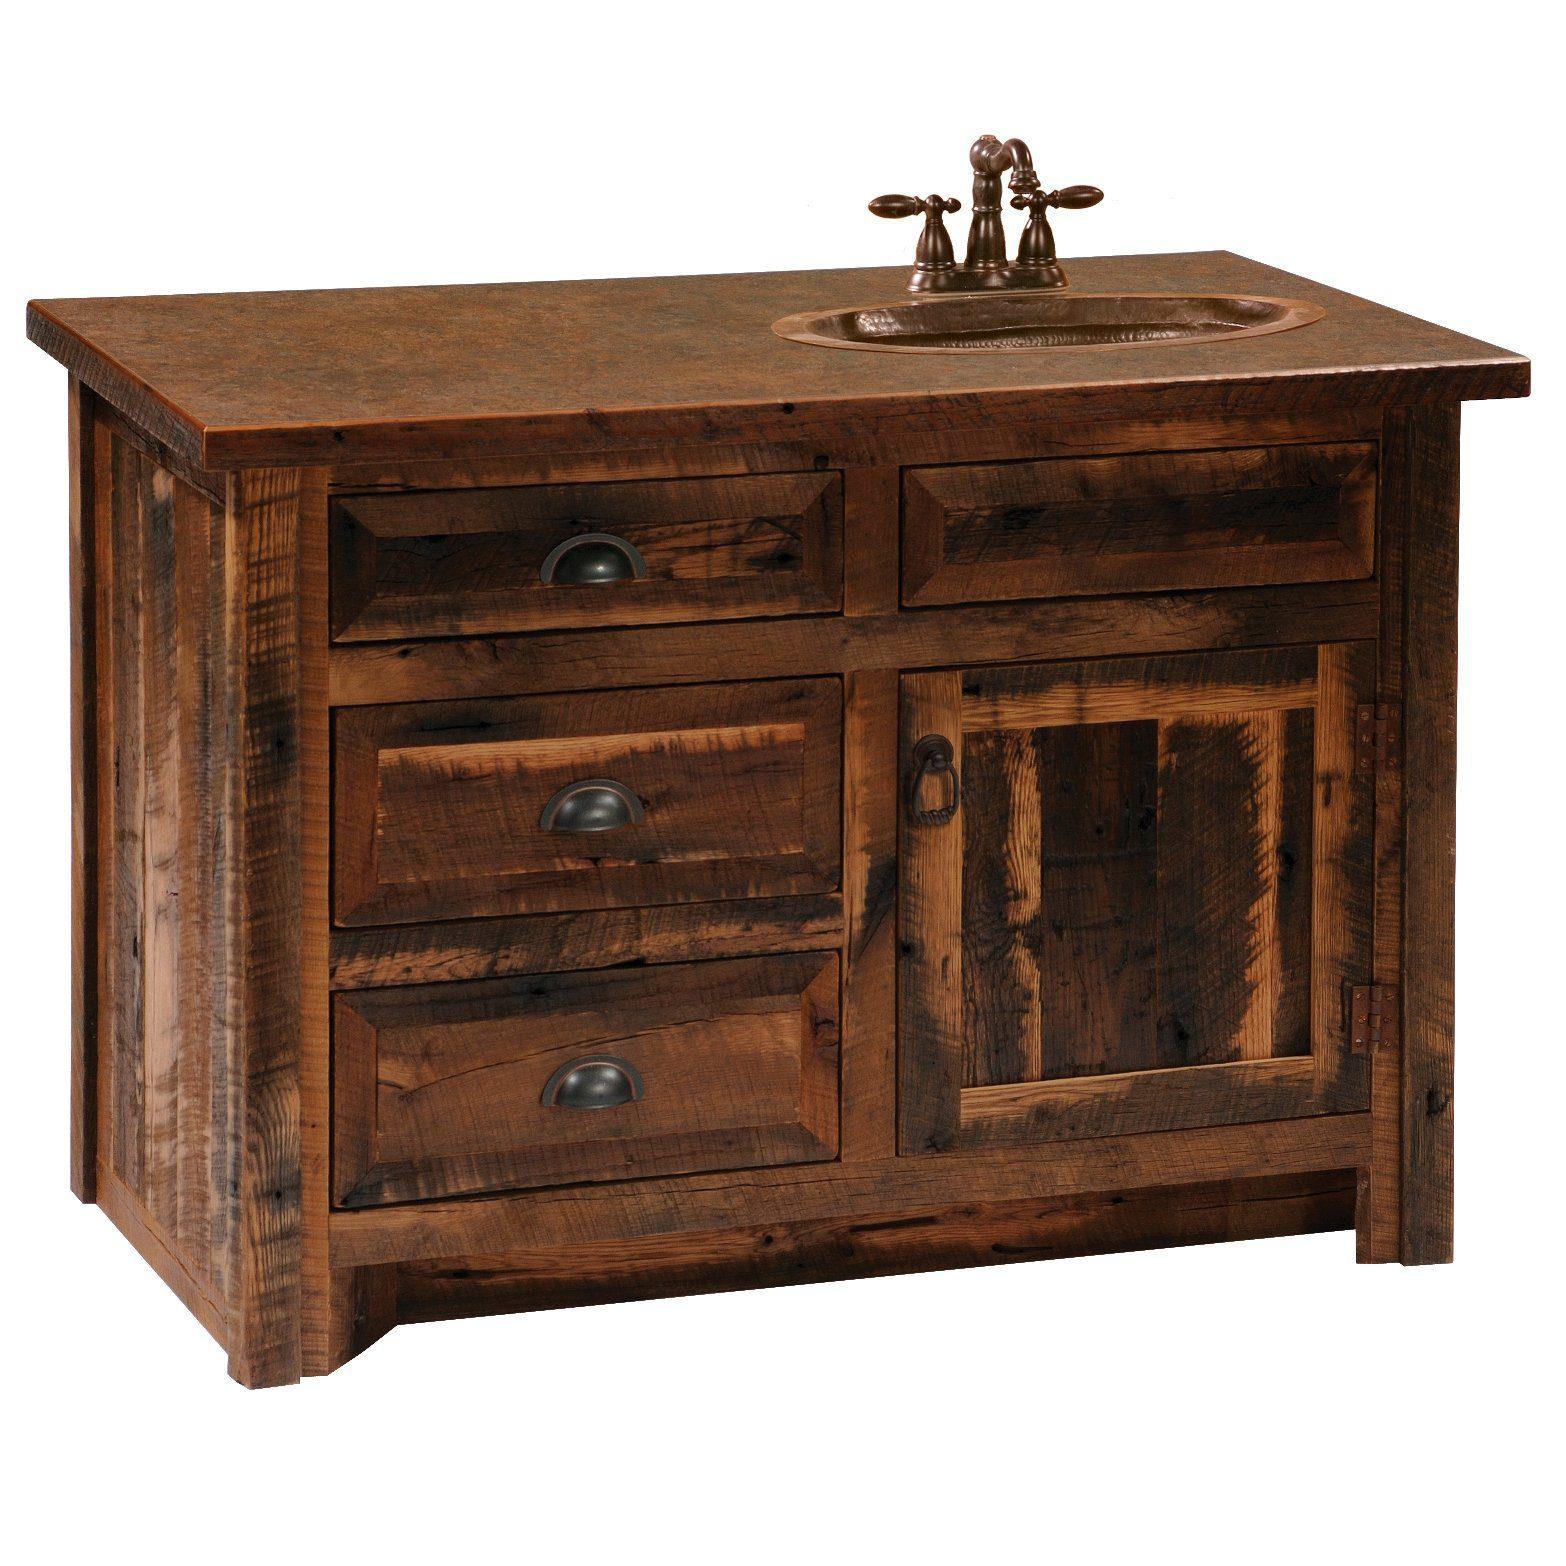 42 Inch Bathroom Vanity Without Top Ove Decors Emma 42 W